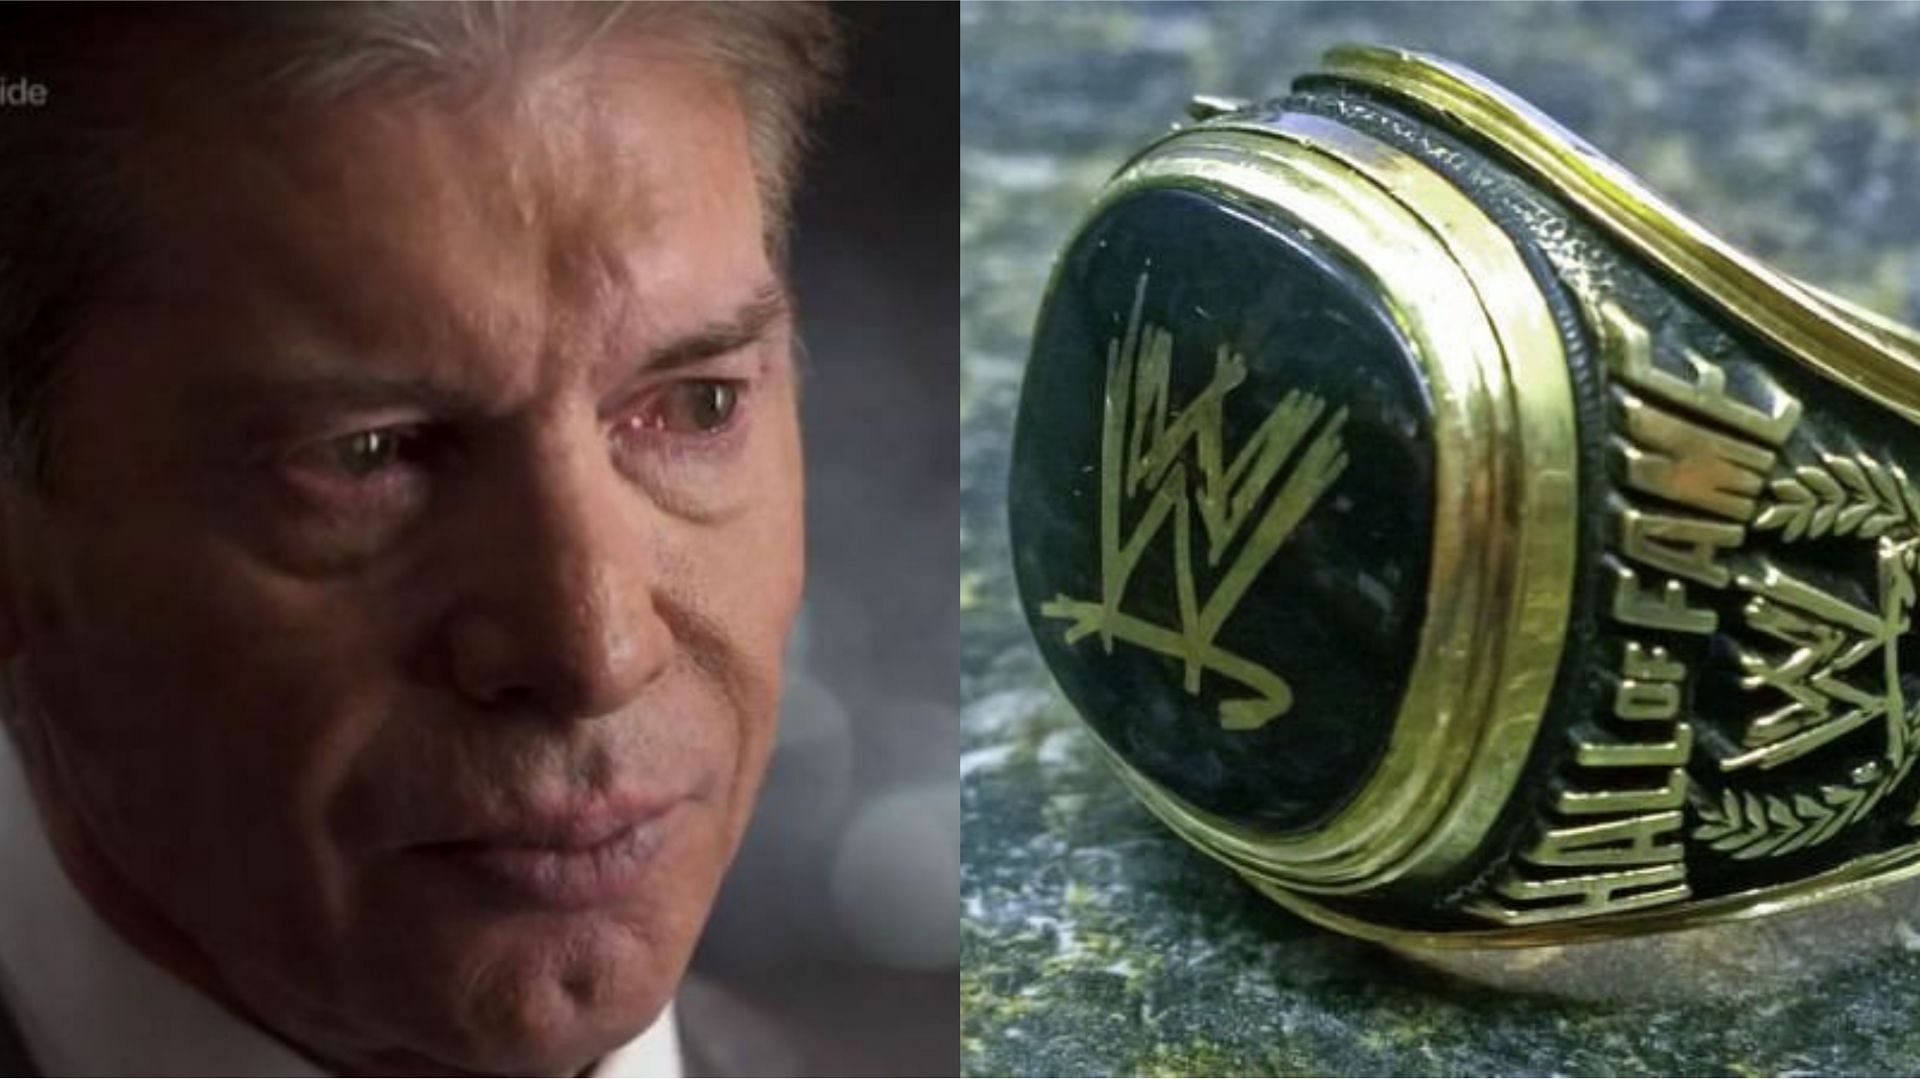 Vince McMahon is the former CEO of WWE!